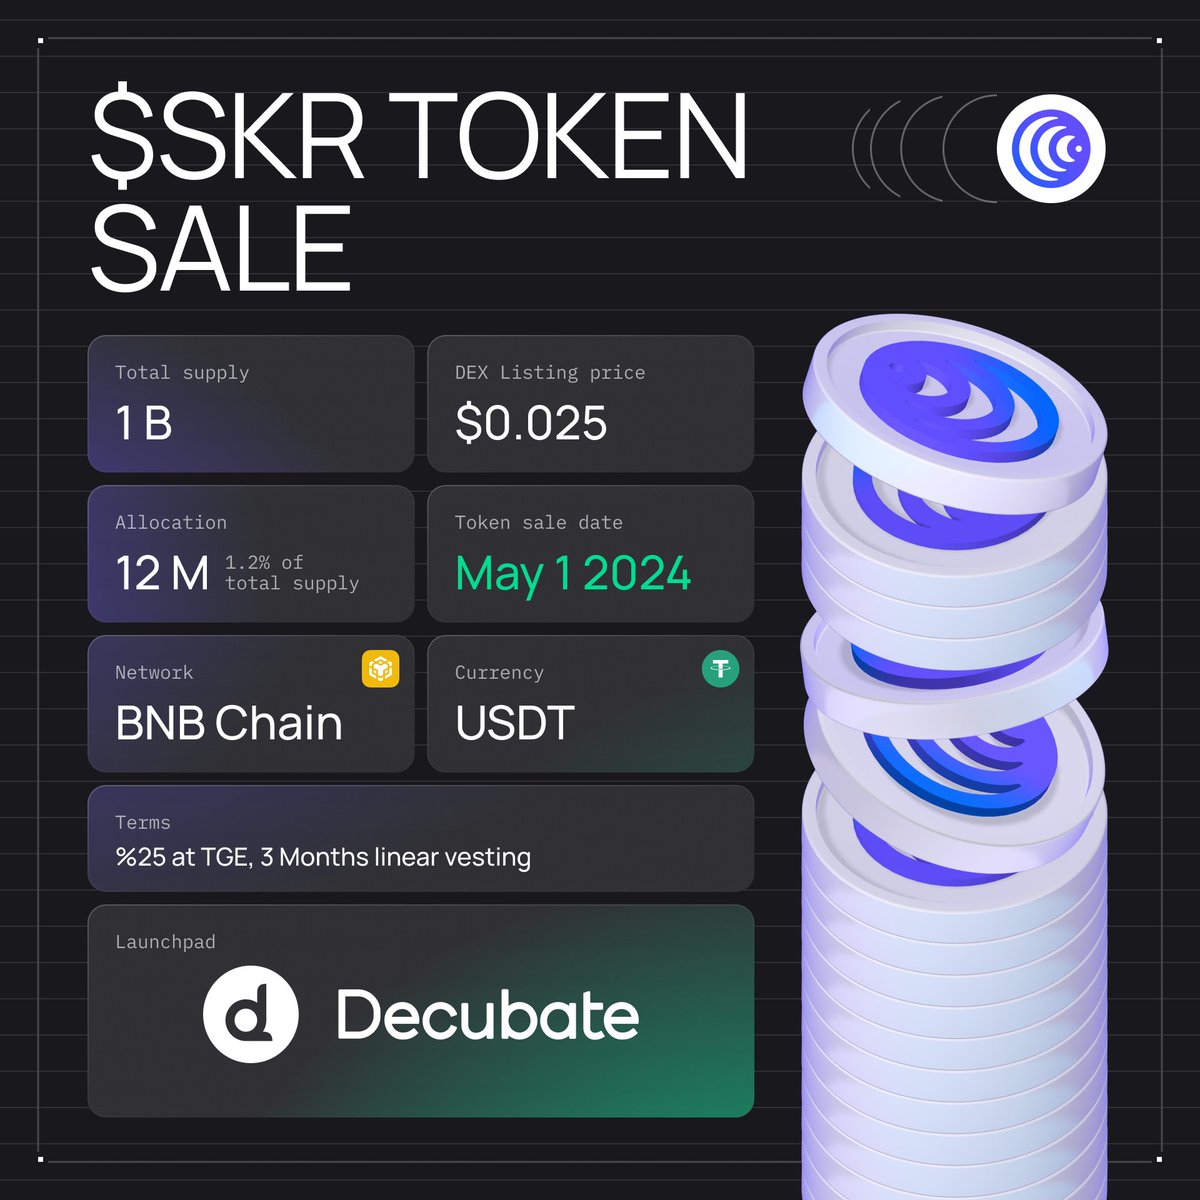 Exciting Announcement from Saakuru Labs 📢 @Saakuru_Labs is thrilled to announce the upcoming Initial DEX Offering (IDO) for their $SKR token! Get ready for this significant milestone in their journey. ✨ 🗓️ Event Date: May 1st 2024 A Thread 🧵